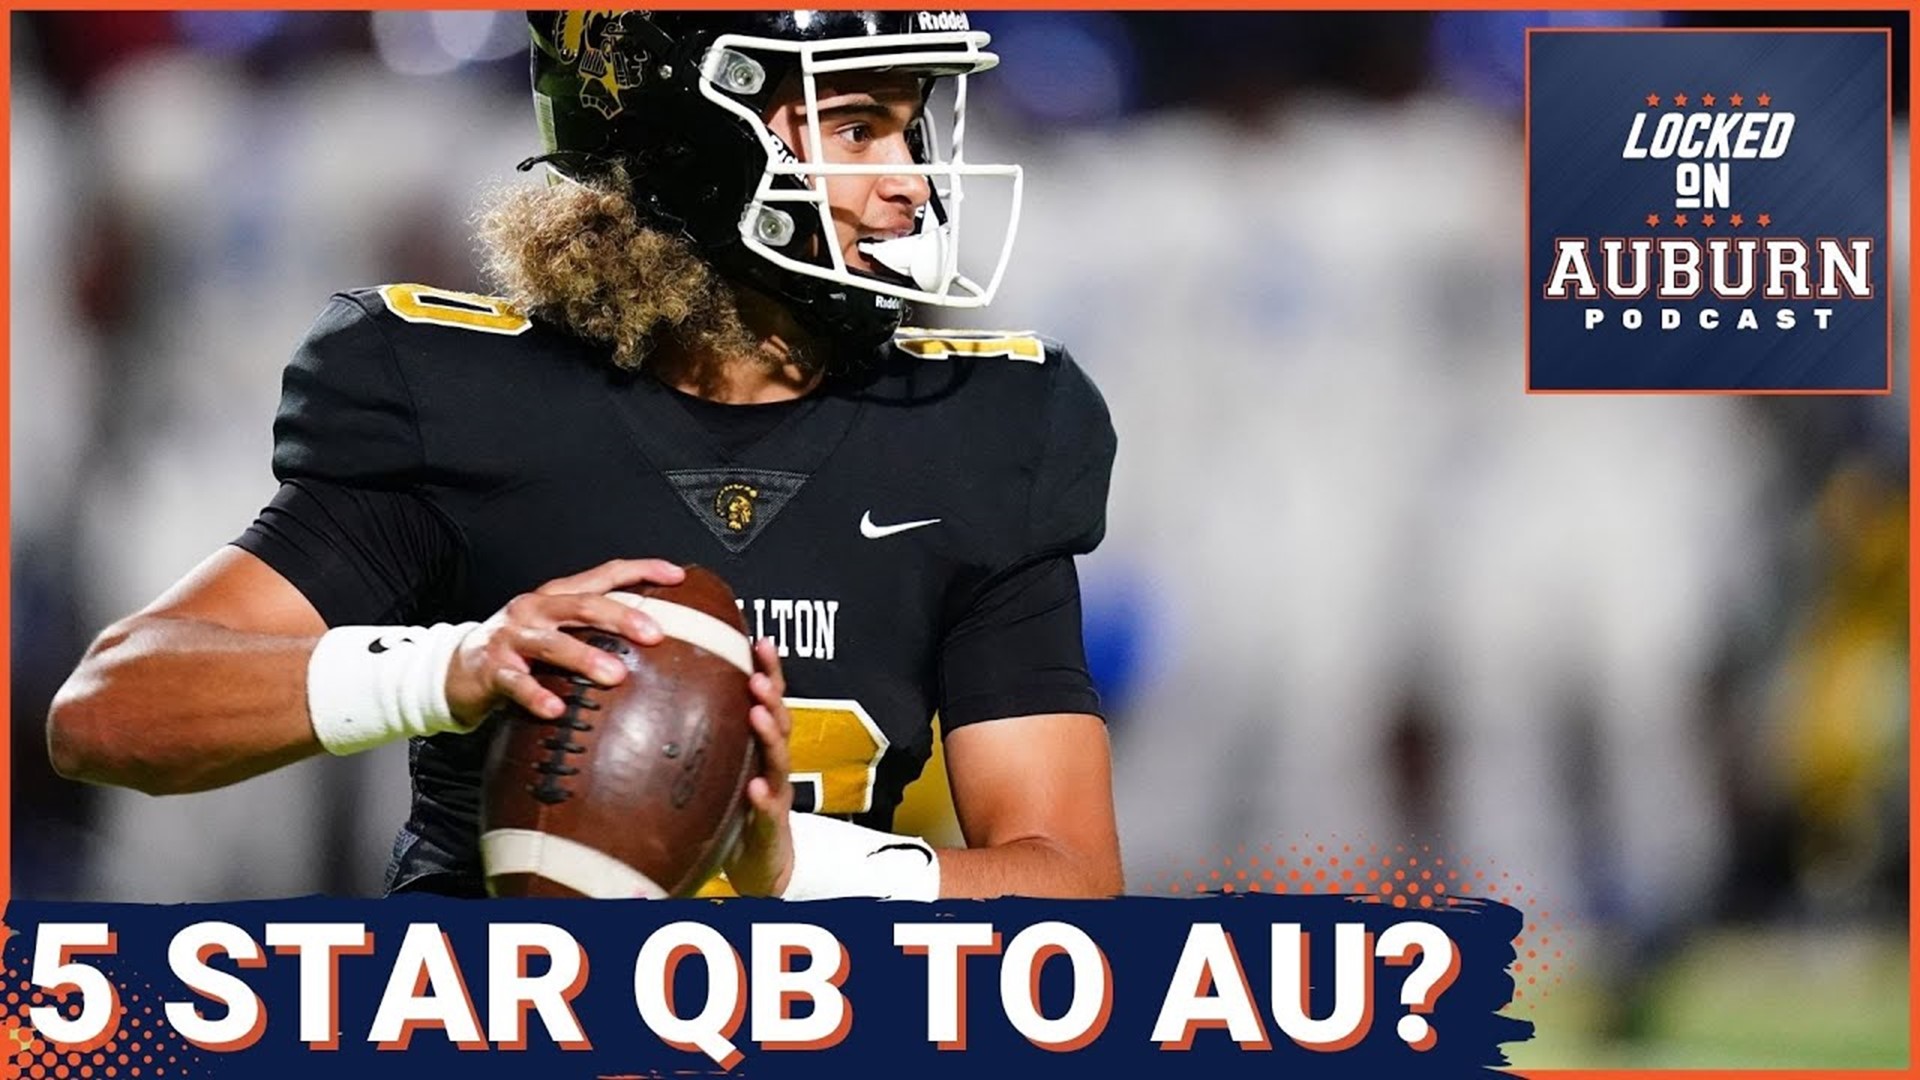 Does Auburn have a real shot at a 5-star quarterback? Auburn Tigers Podcast